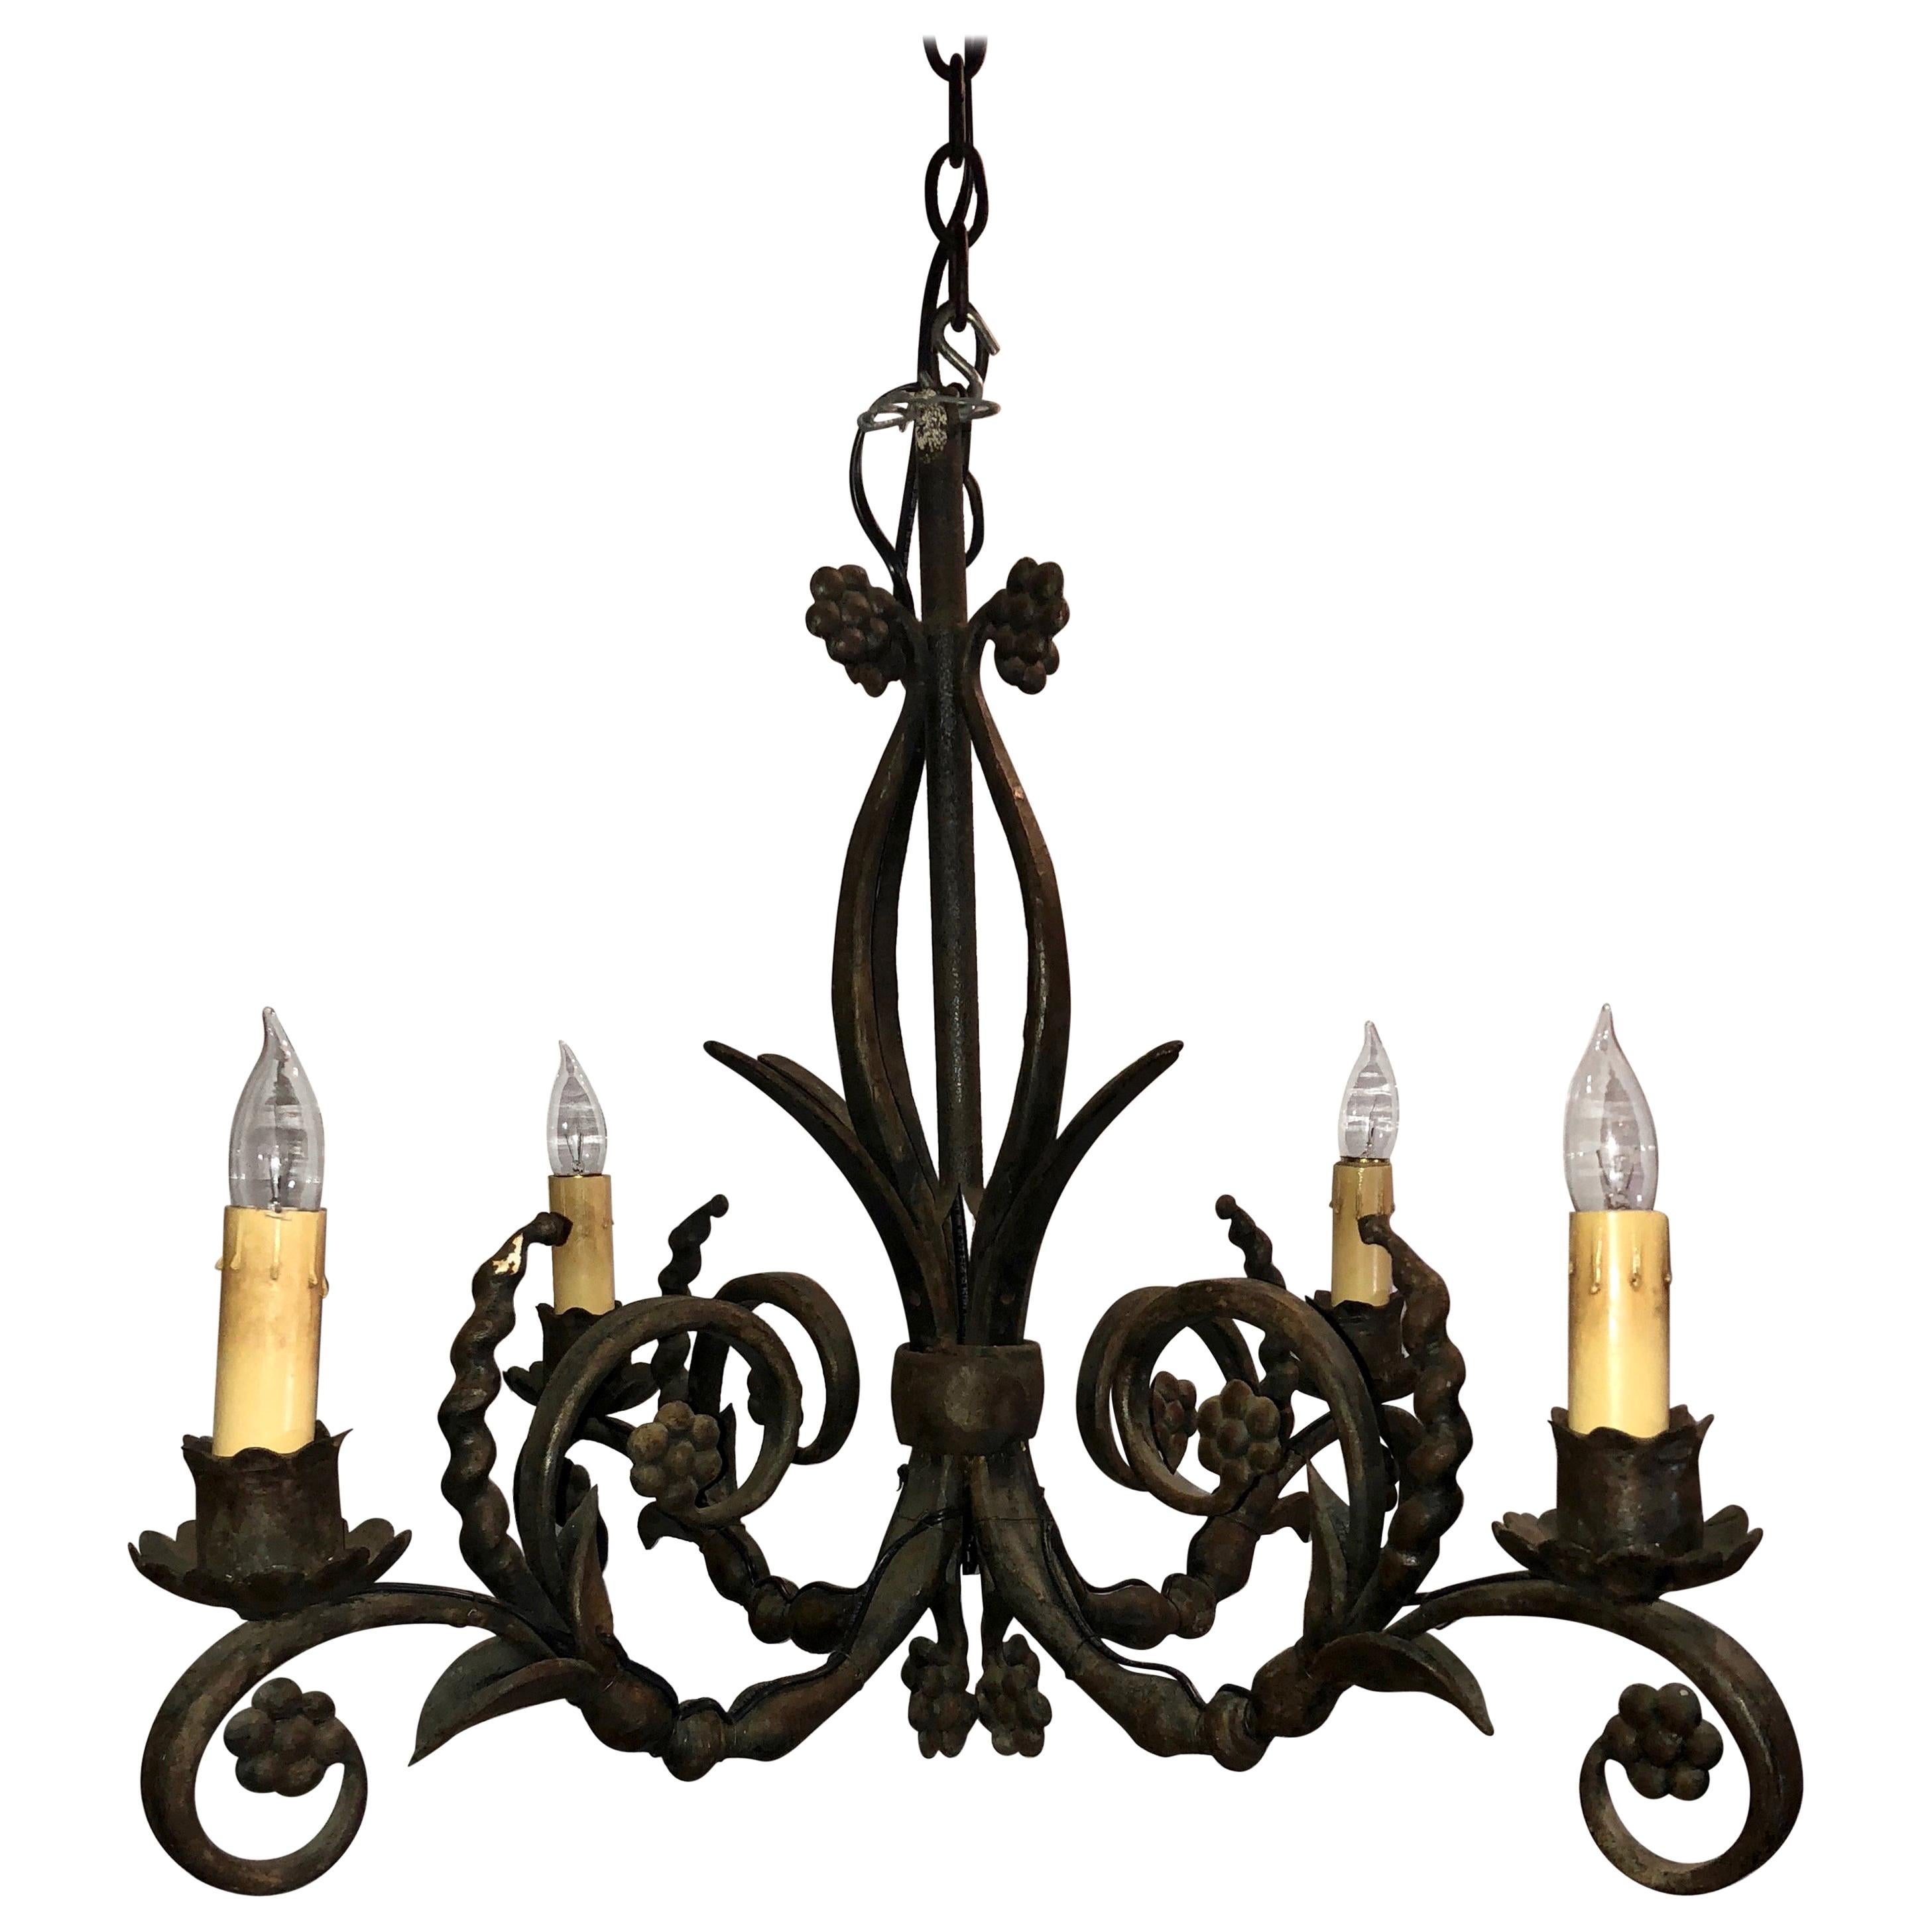 Antique French Wrought Iron Chandelier, circa 1890